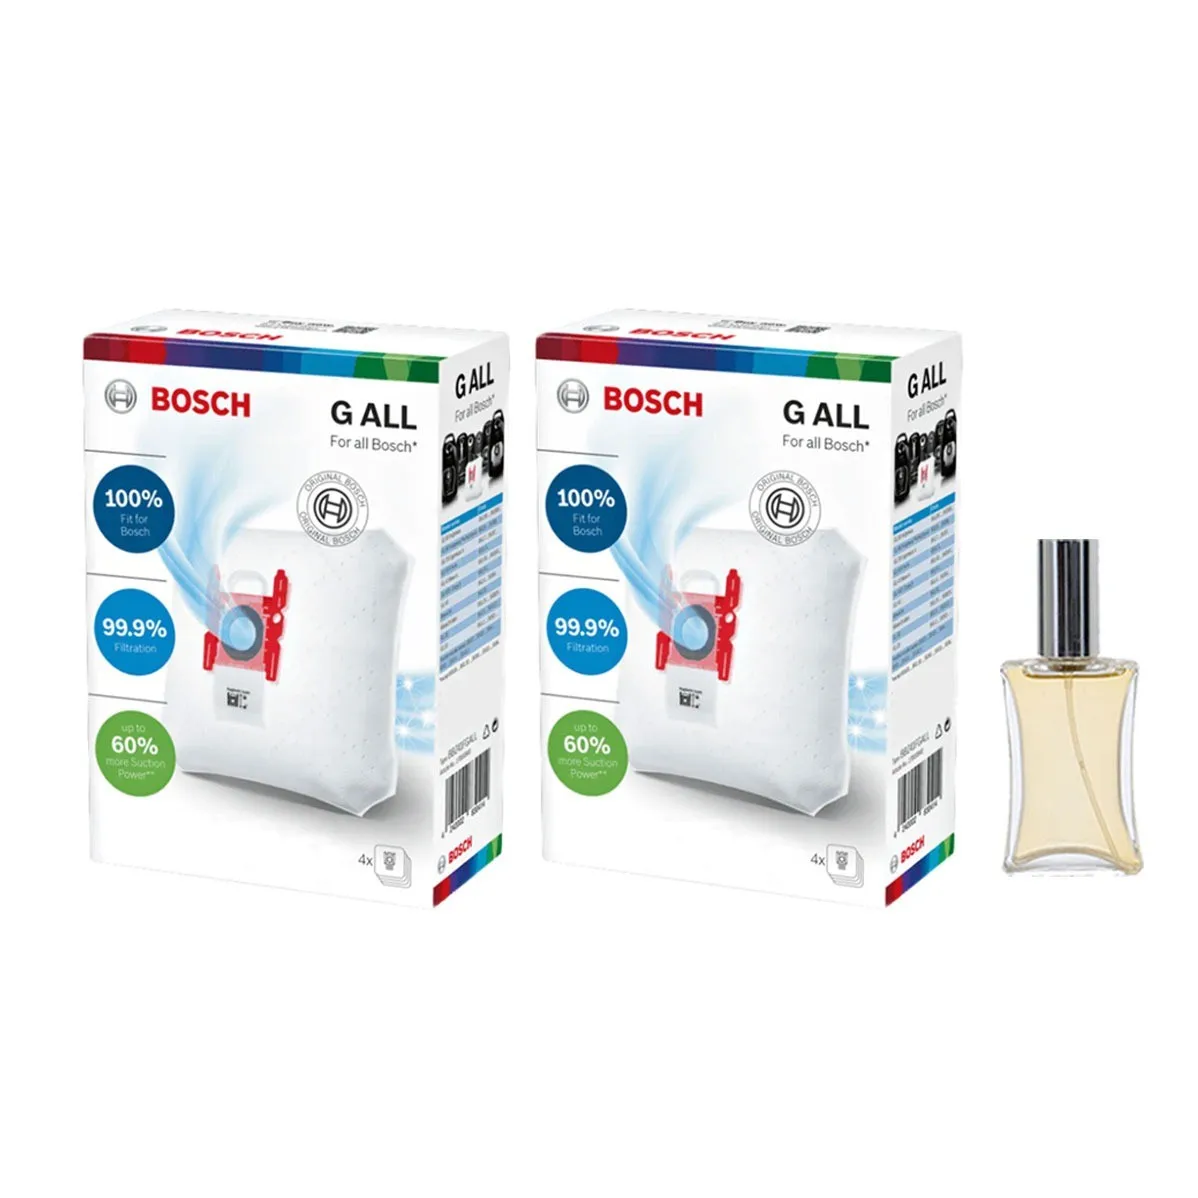 

Bosch BGL 35 MOV16 Vacuum Cleaner Type G ALL Dust Bag 2 Boxes (8 Pieces) HT-TT0084-2-36 GIFT